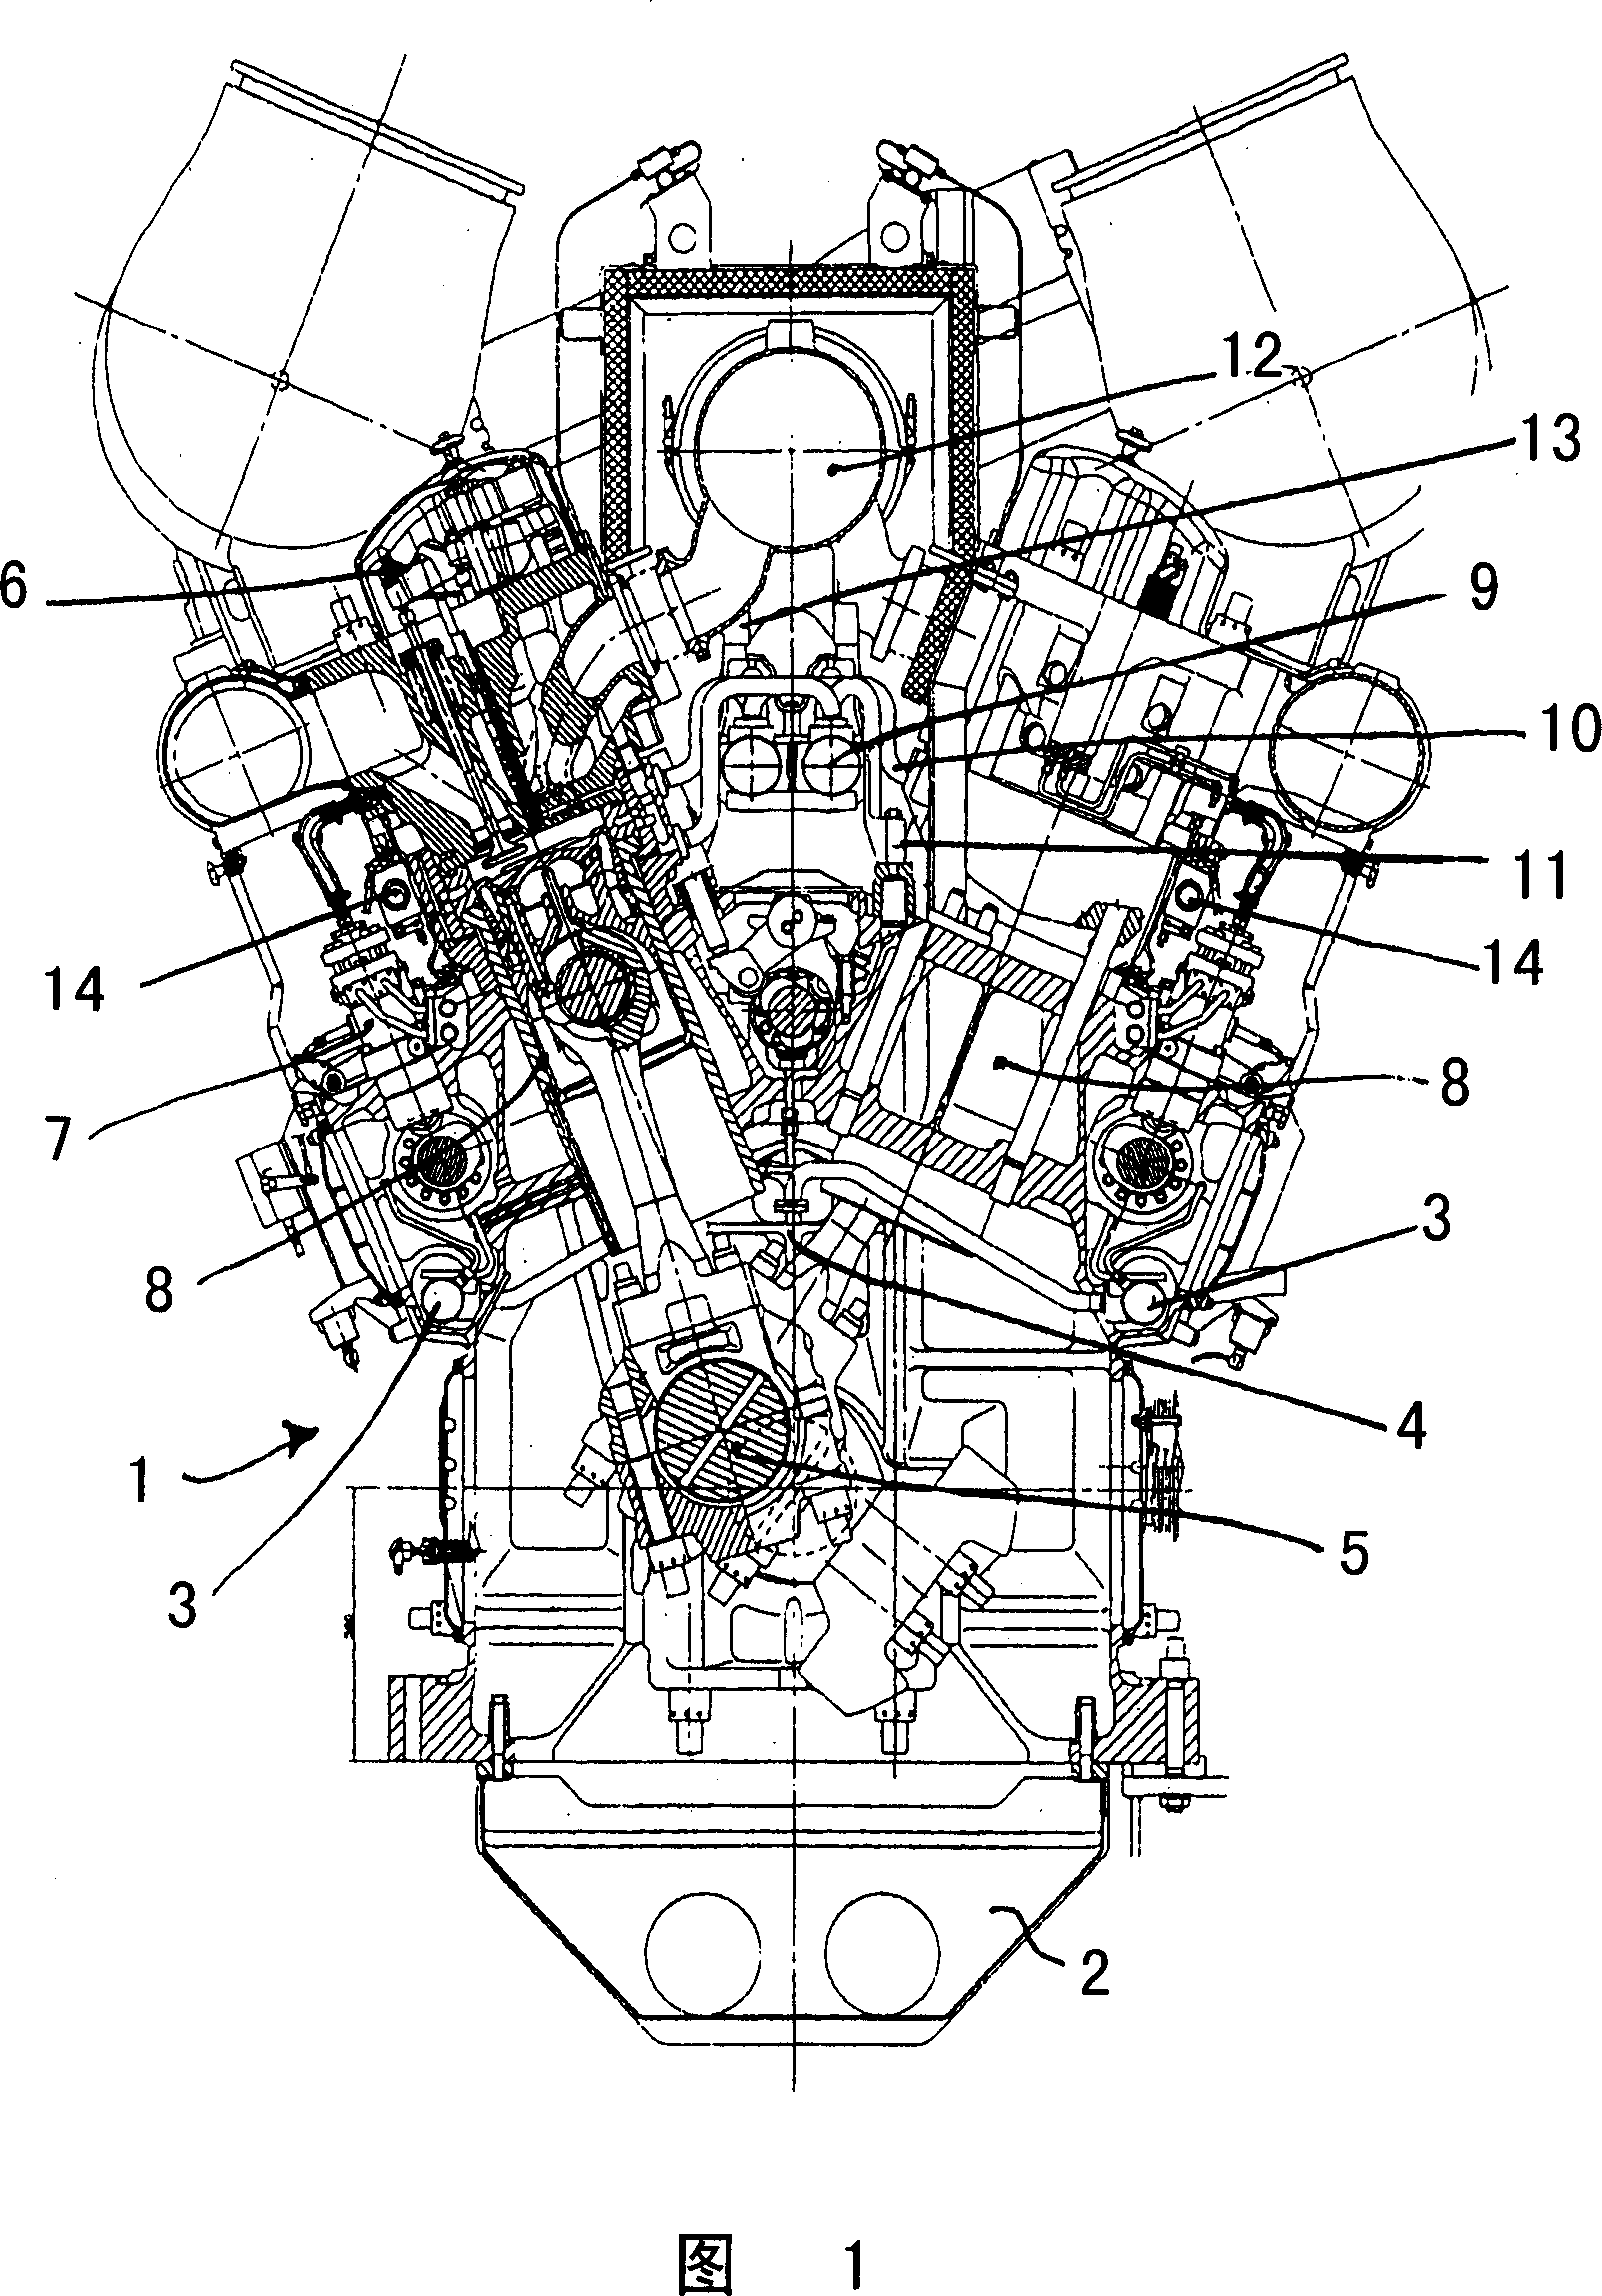 Internal combustion engine with a lubricating, cooling and starting system